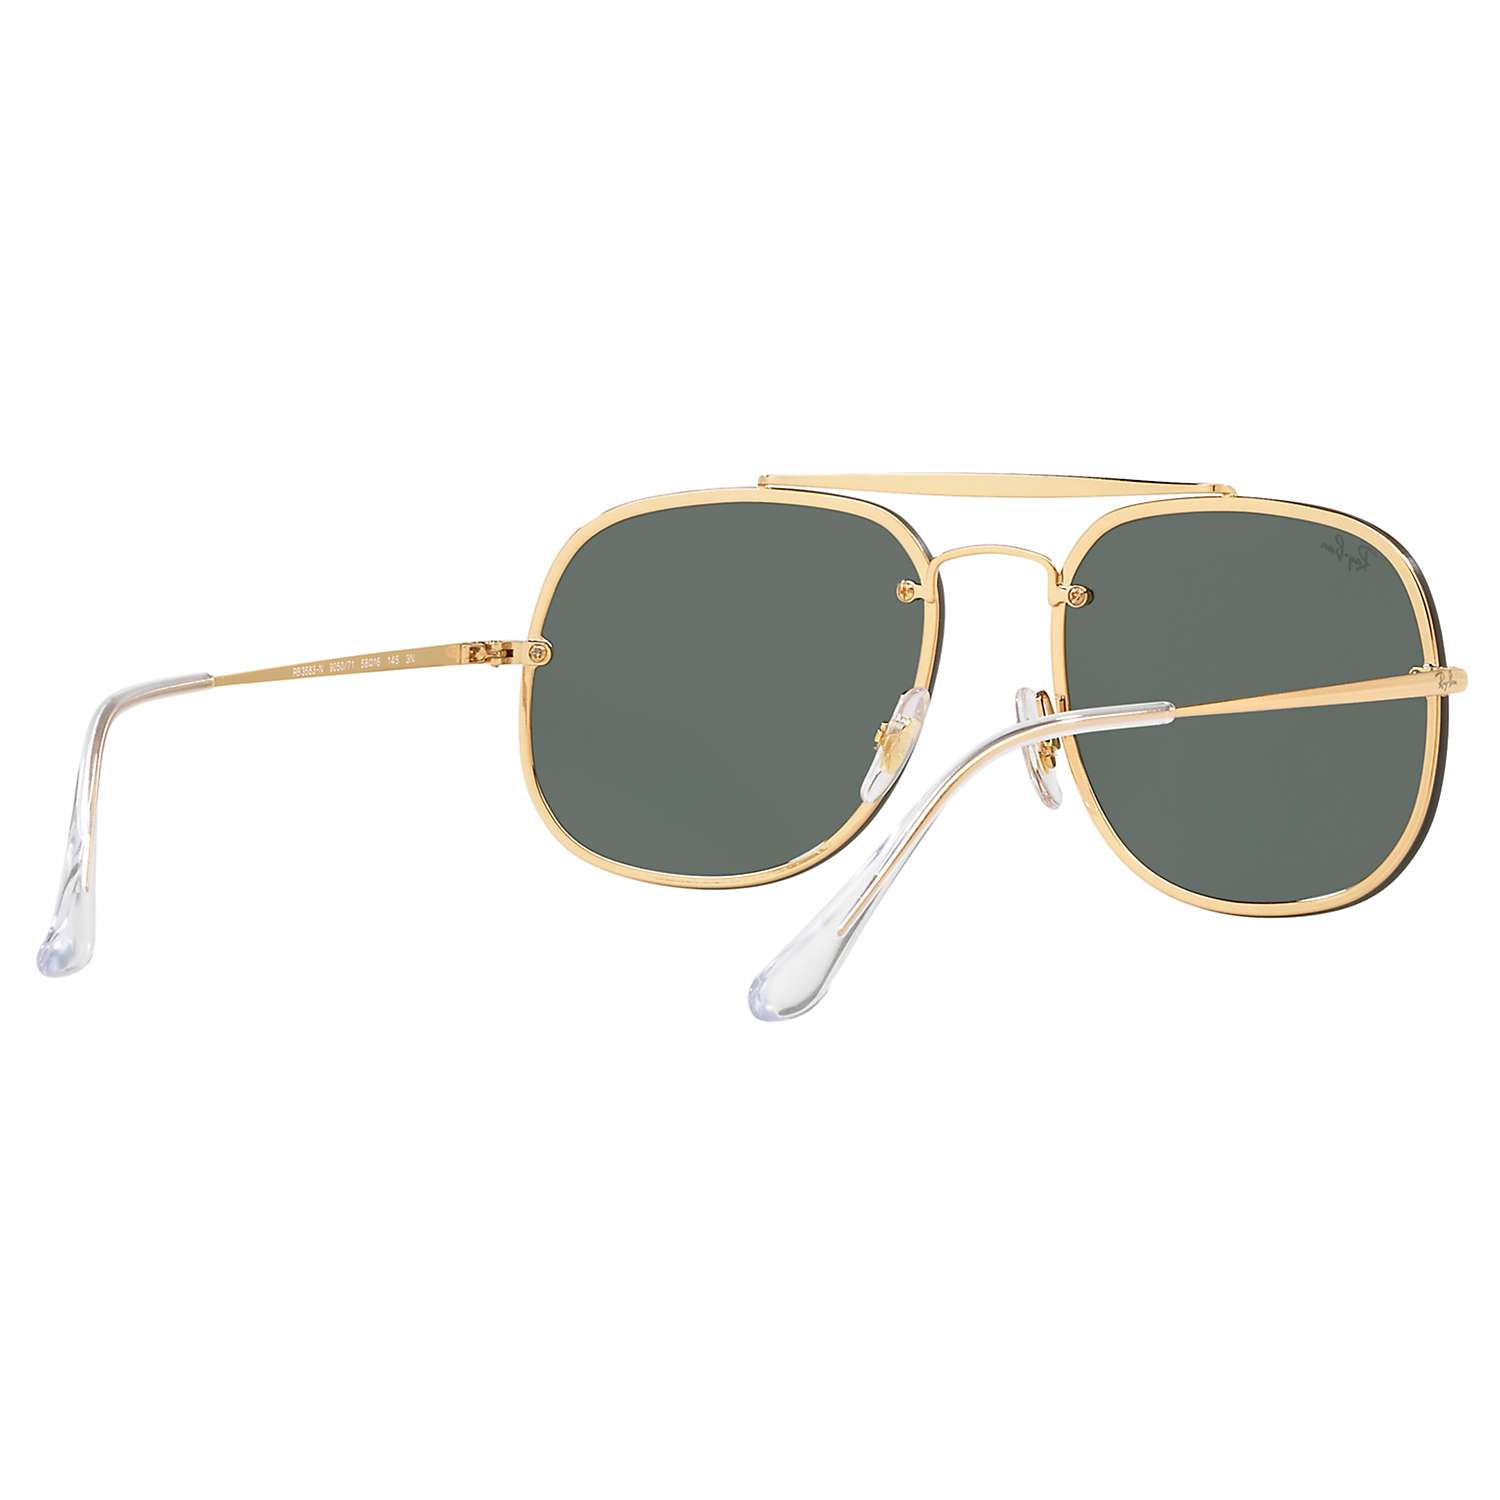 Buy Ray-Ban RB3583 Unisex Square Sunglasses Online at johnlewis.com